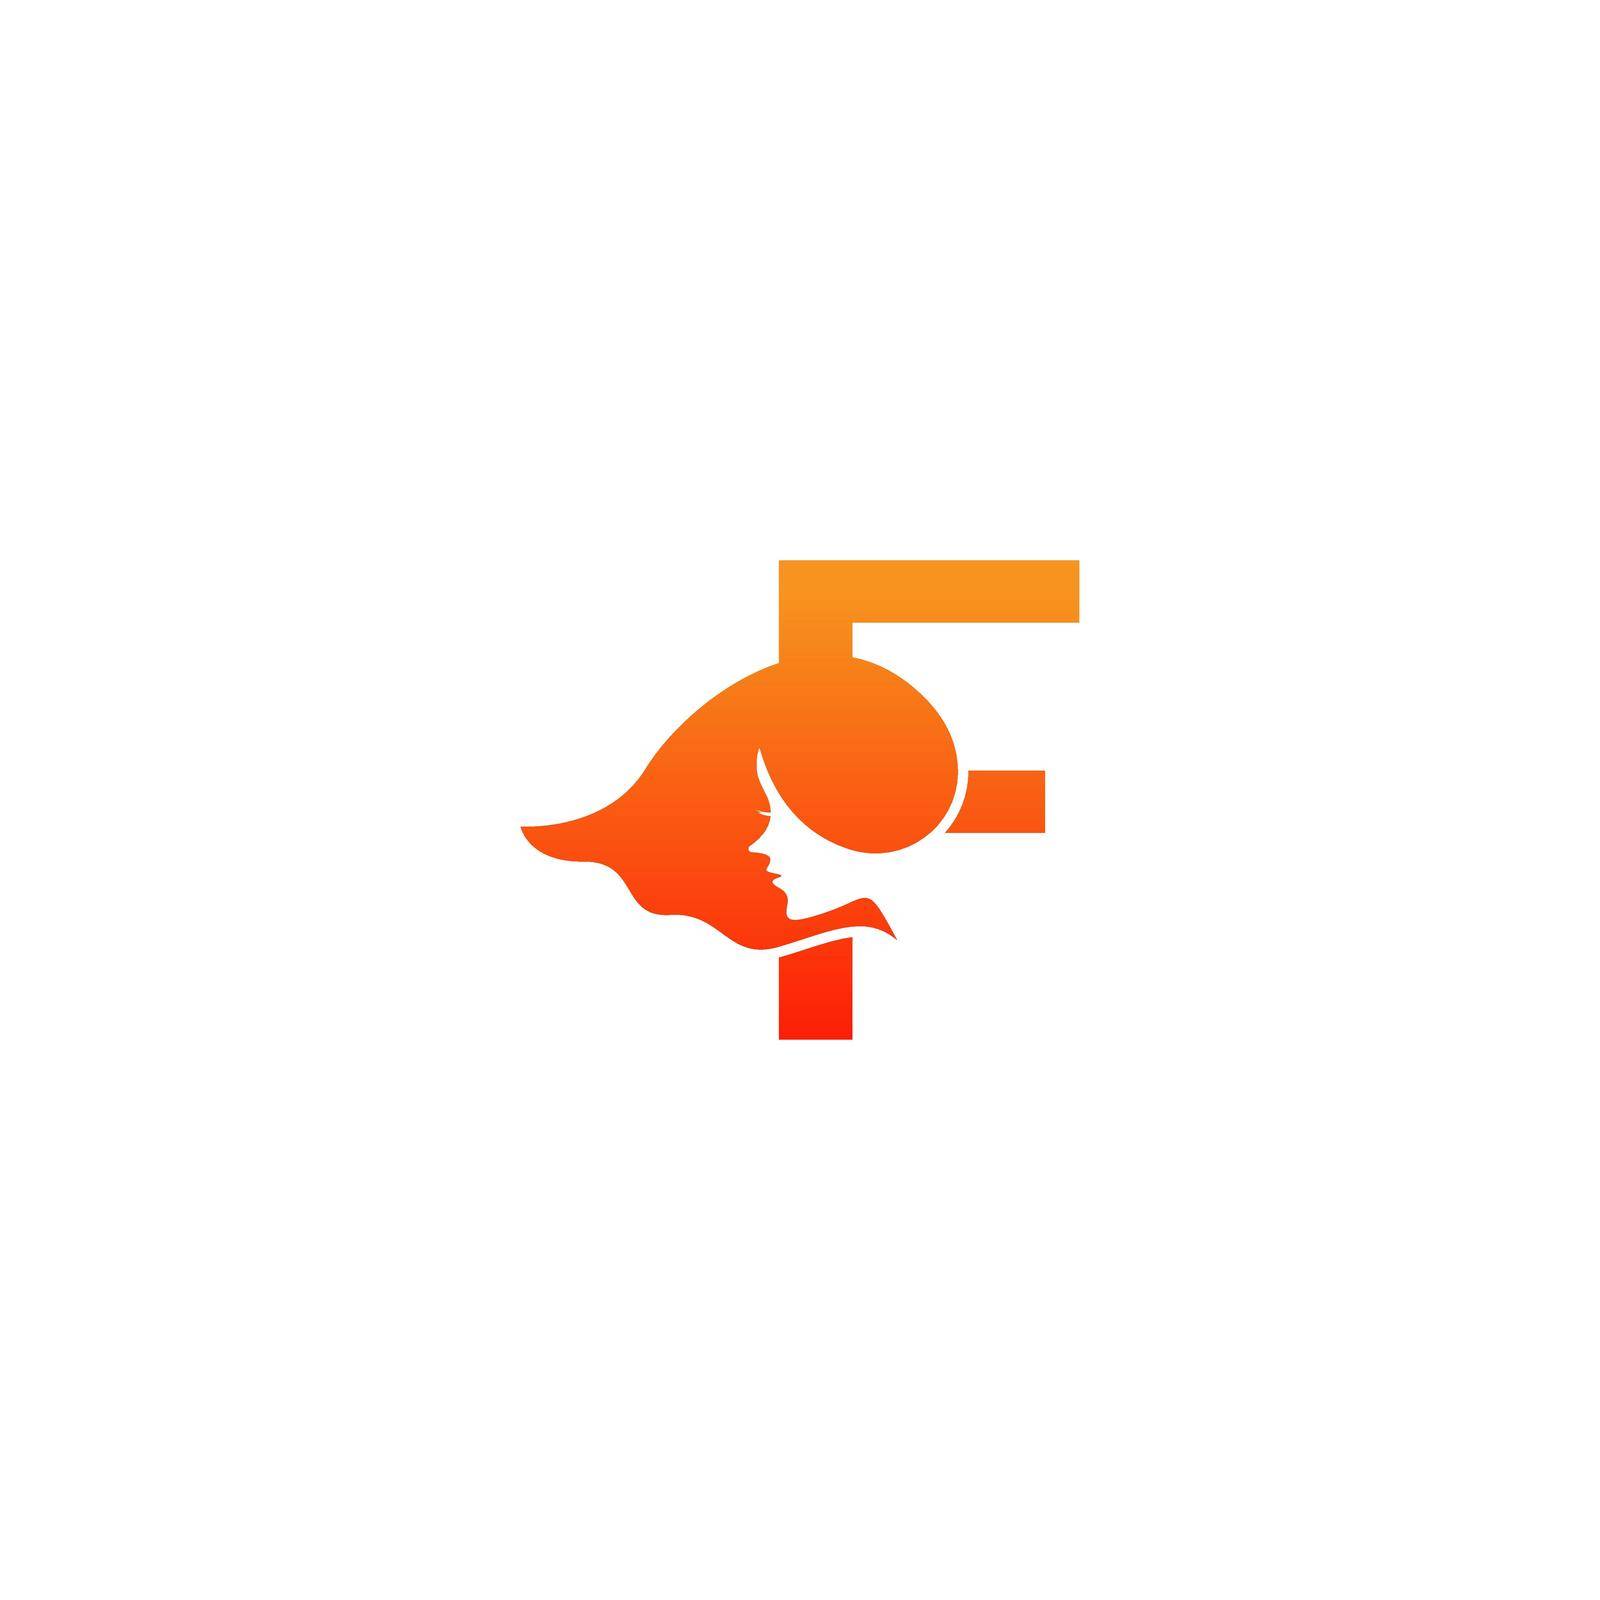 Letter F with woman face logo icon design vector by bellaxbudhong3